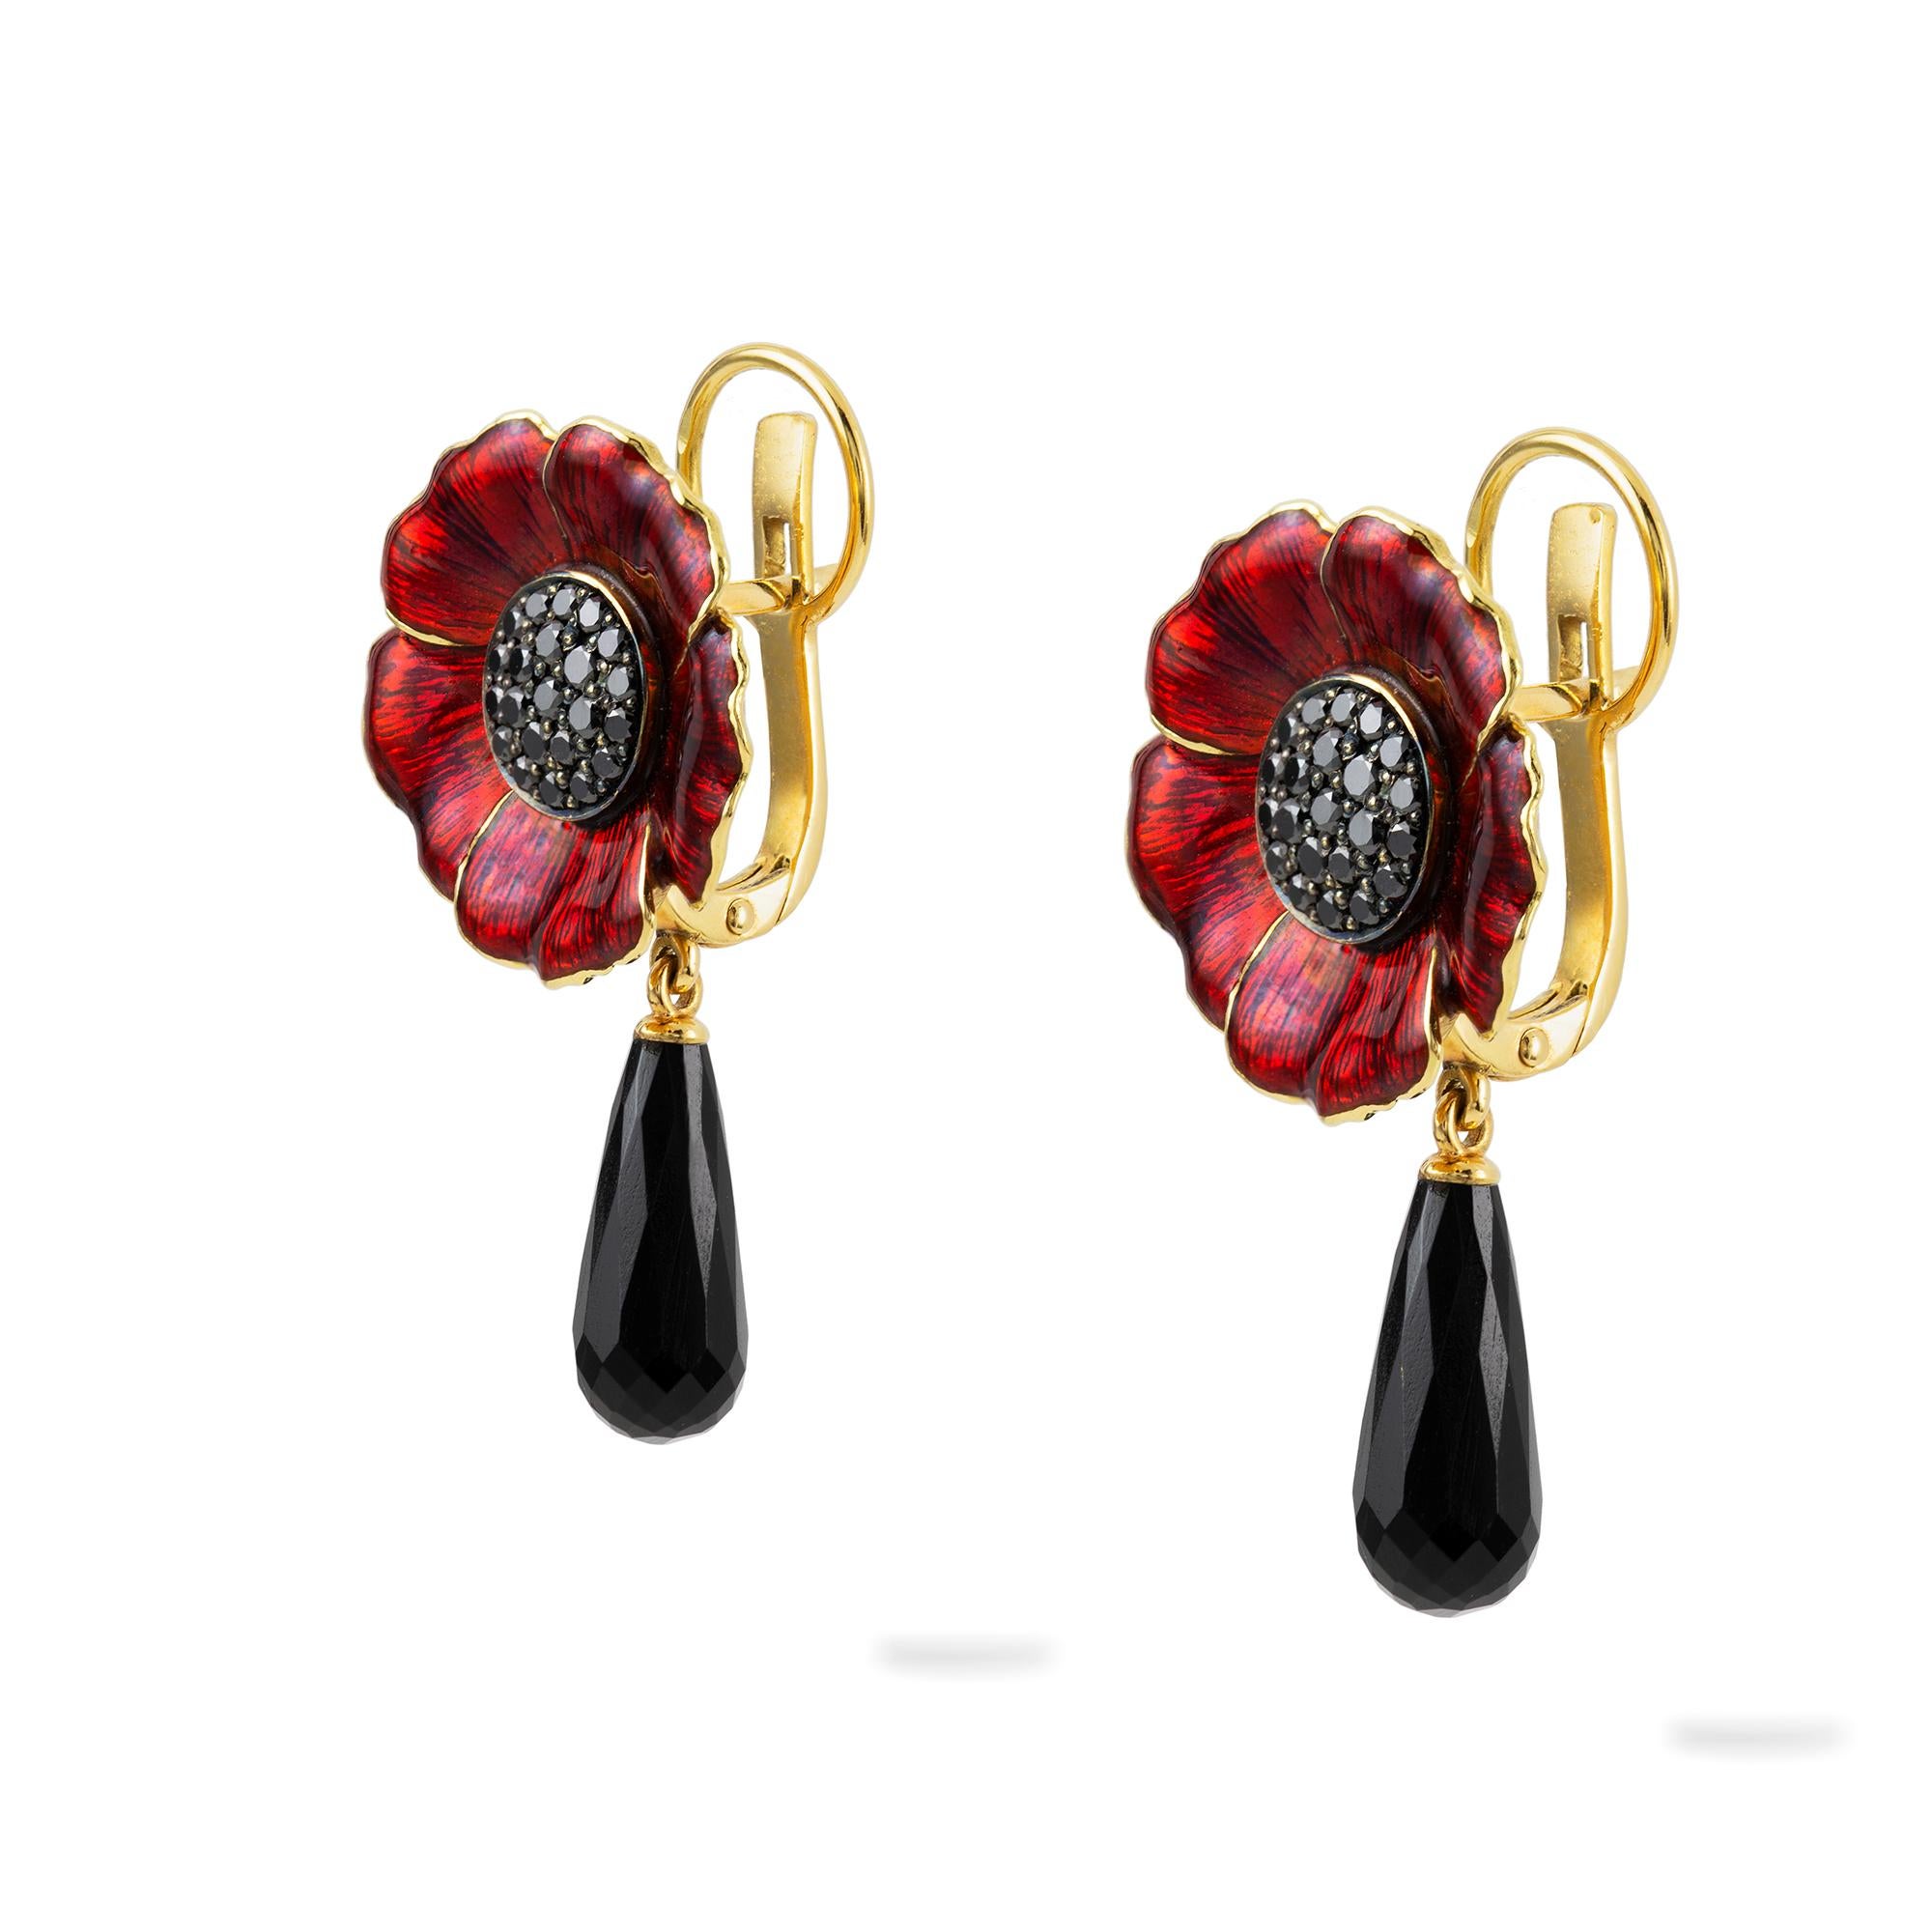 A pair of anemone earrings by Ilgiz F, the stamen encrusted with black diamonds weighing 0.46 carats in total, surrounded by red champlevé enamelled petals, each flowerhead suspending a faceted onyx drop weighing 4.5 carats in total, all in yellow